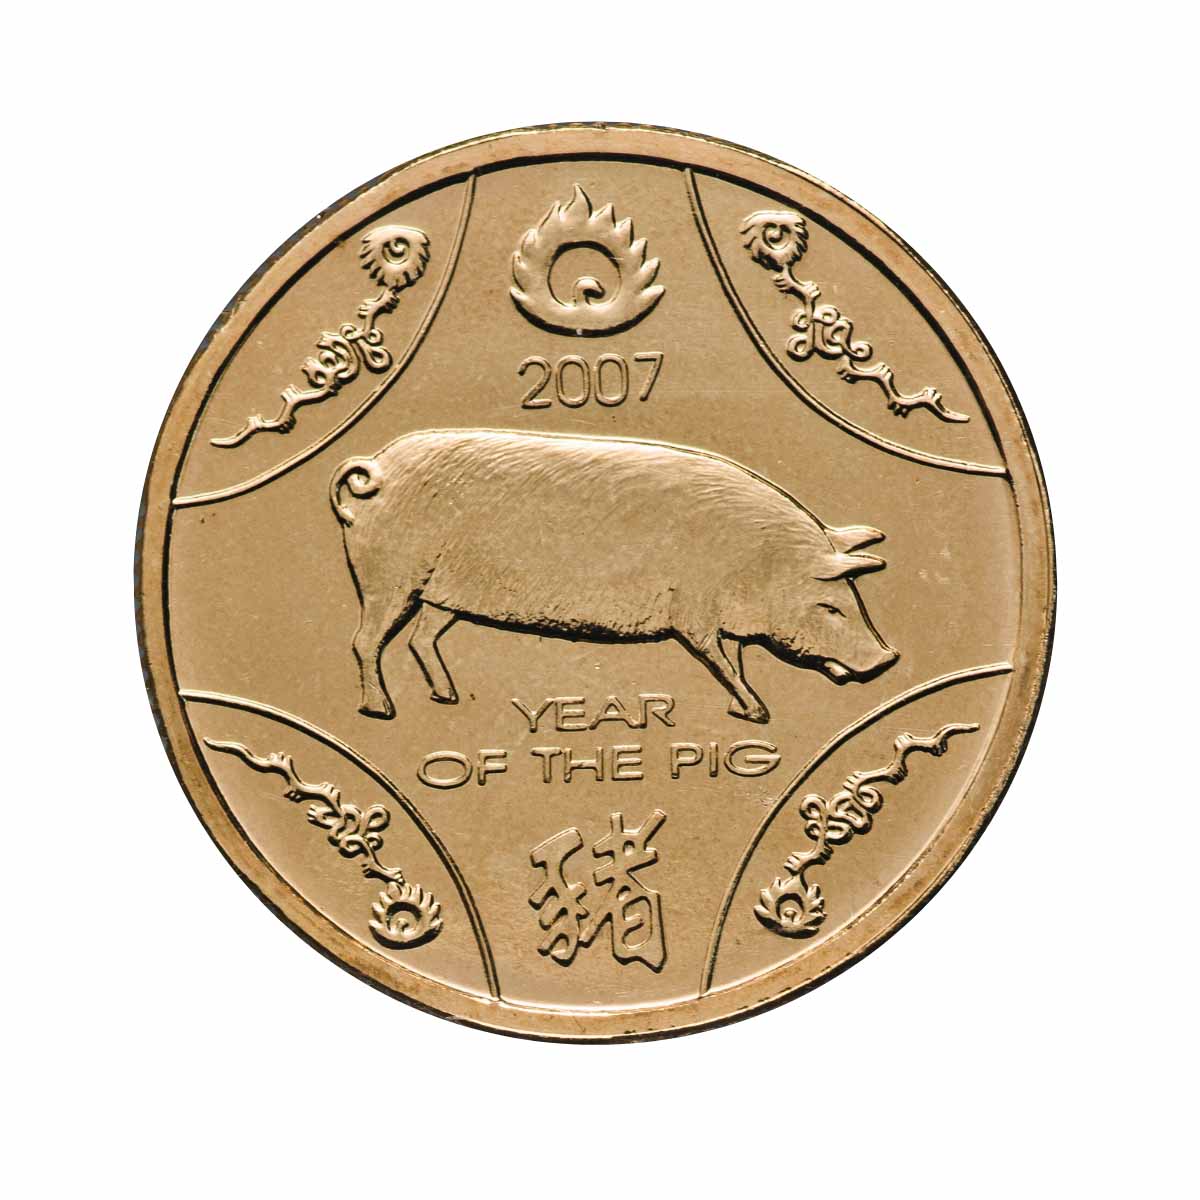 Year of the Pig 2007 $1 Uncirculated Coin